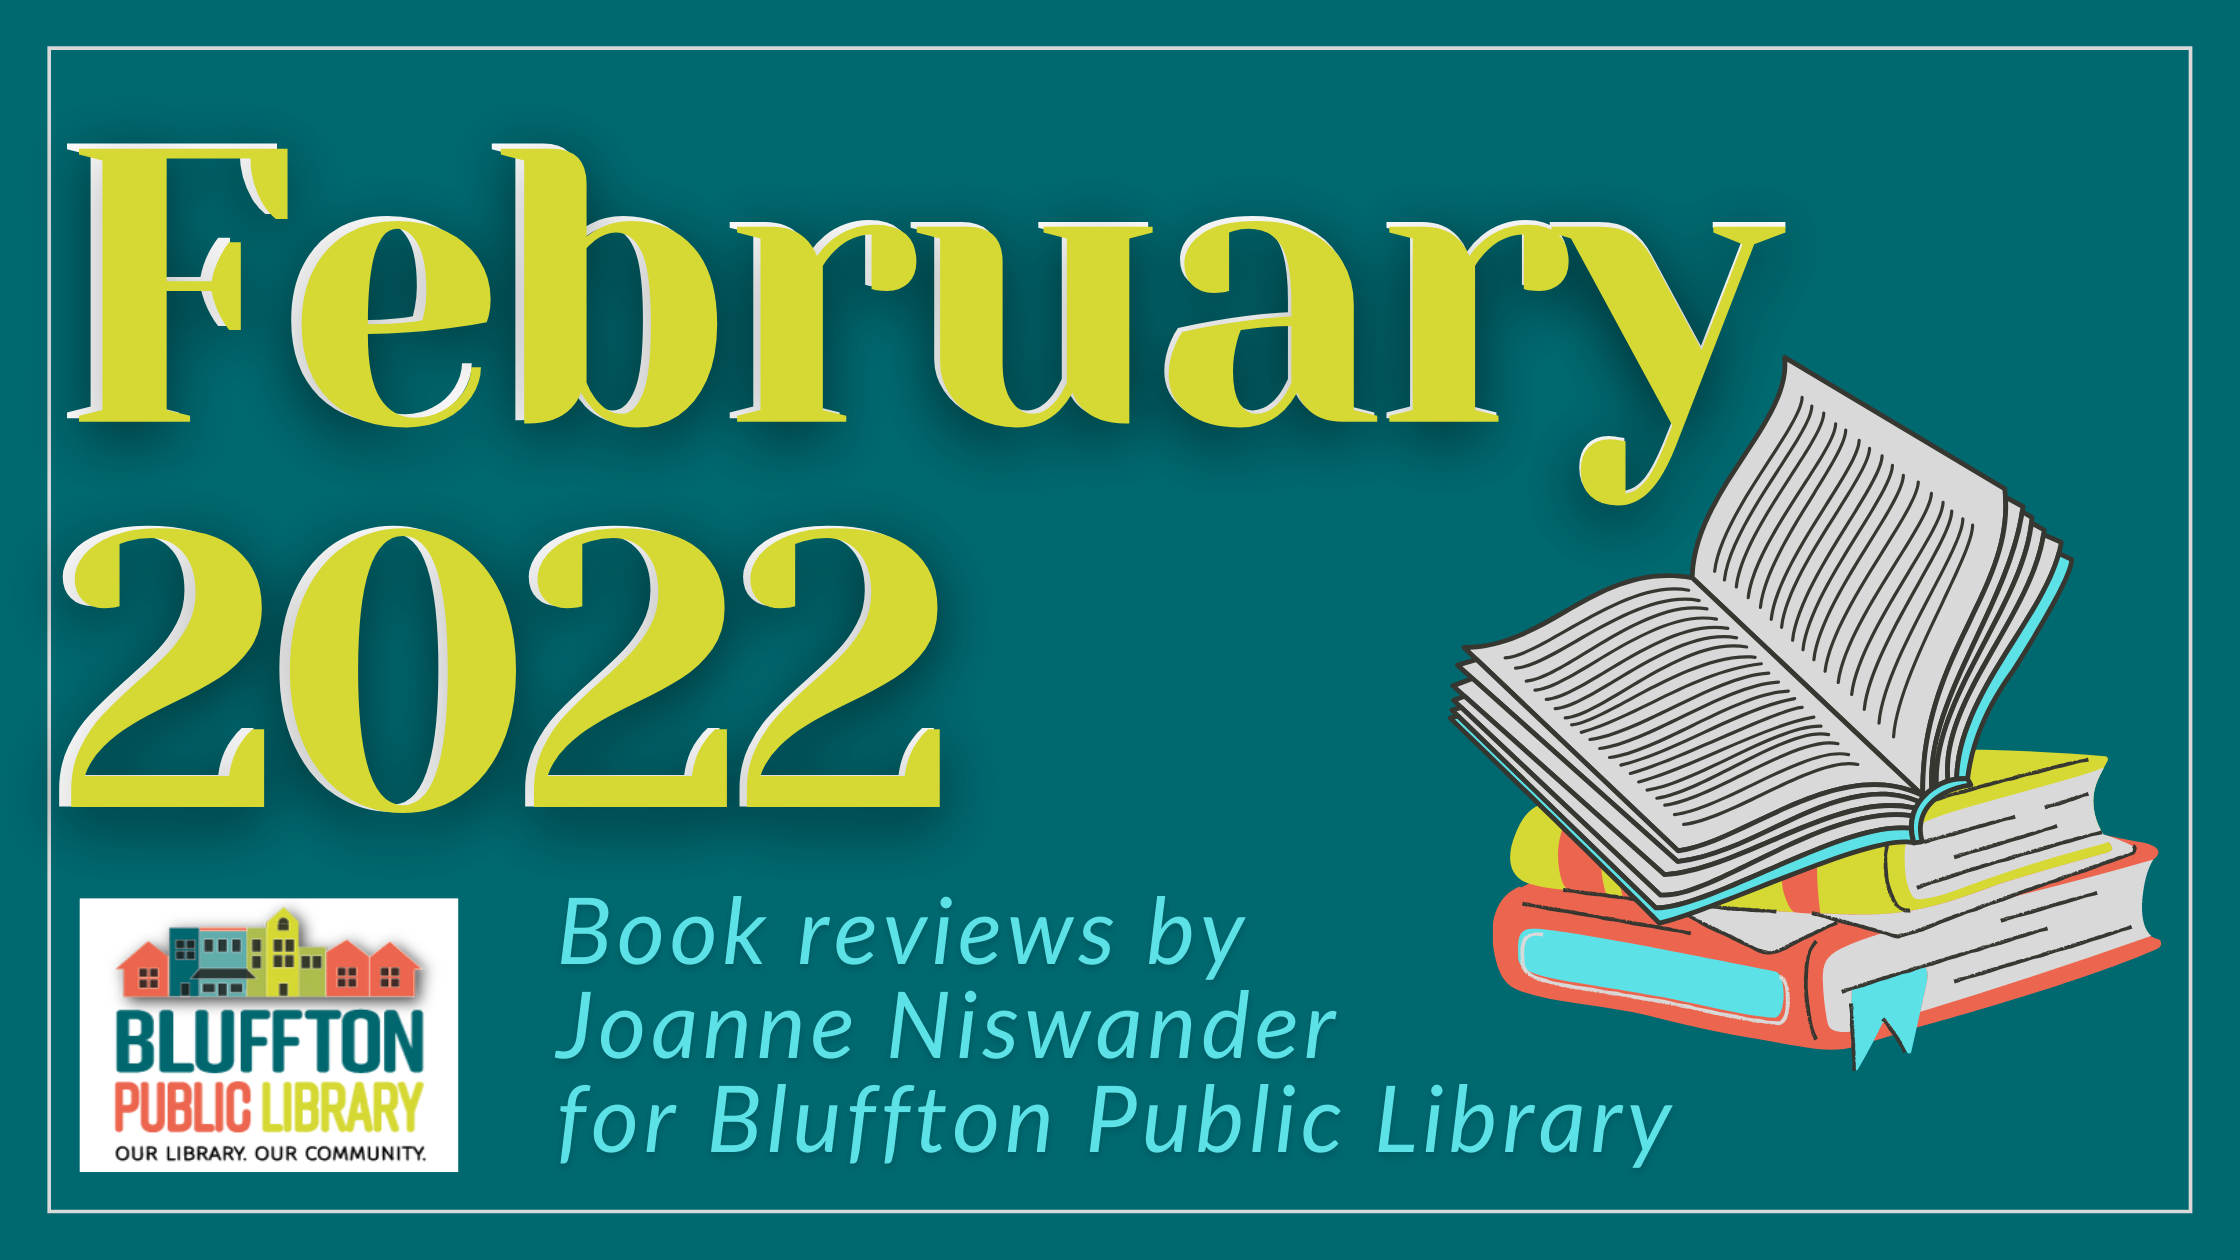 Joanne Read's - February 2022 book reviews